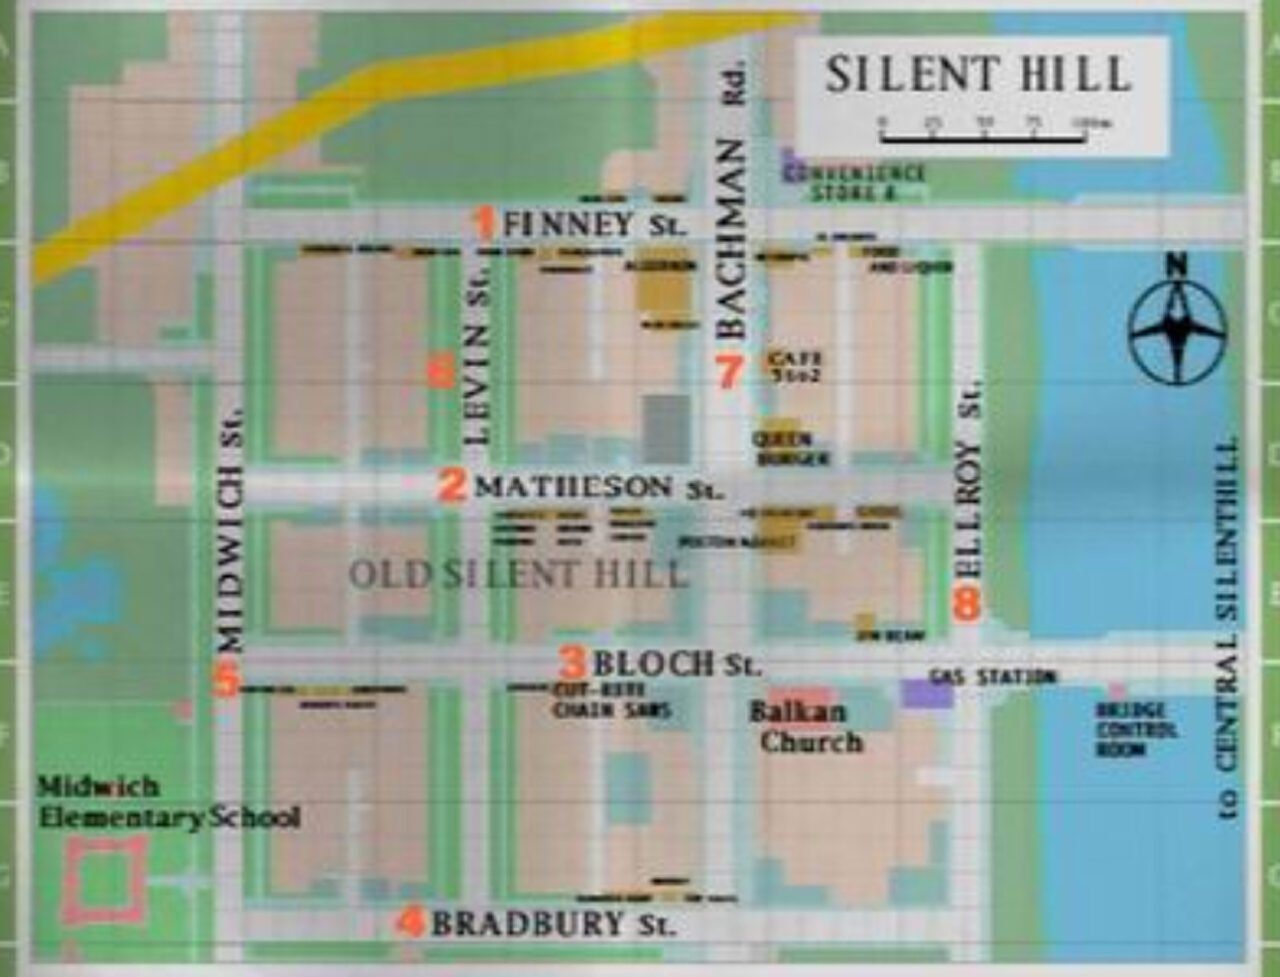 Silent Hill streets name